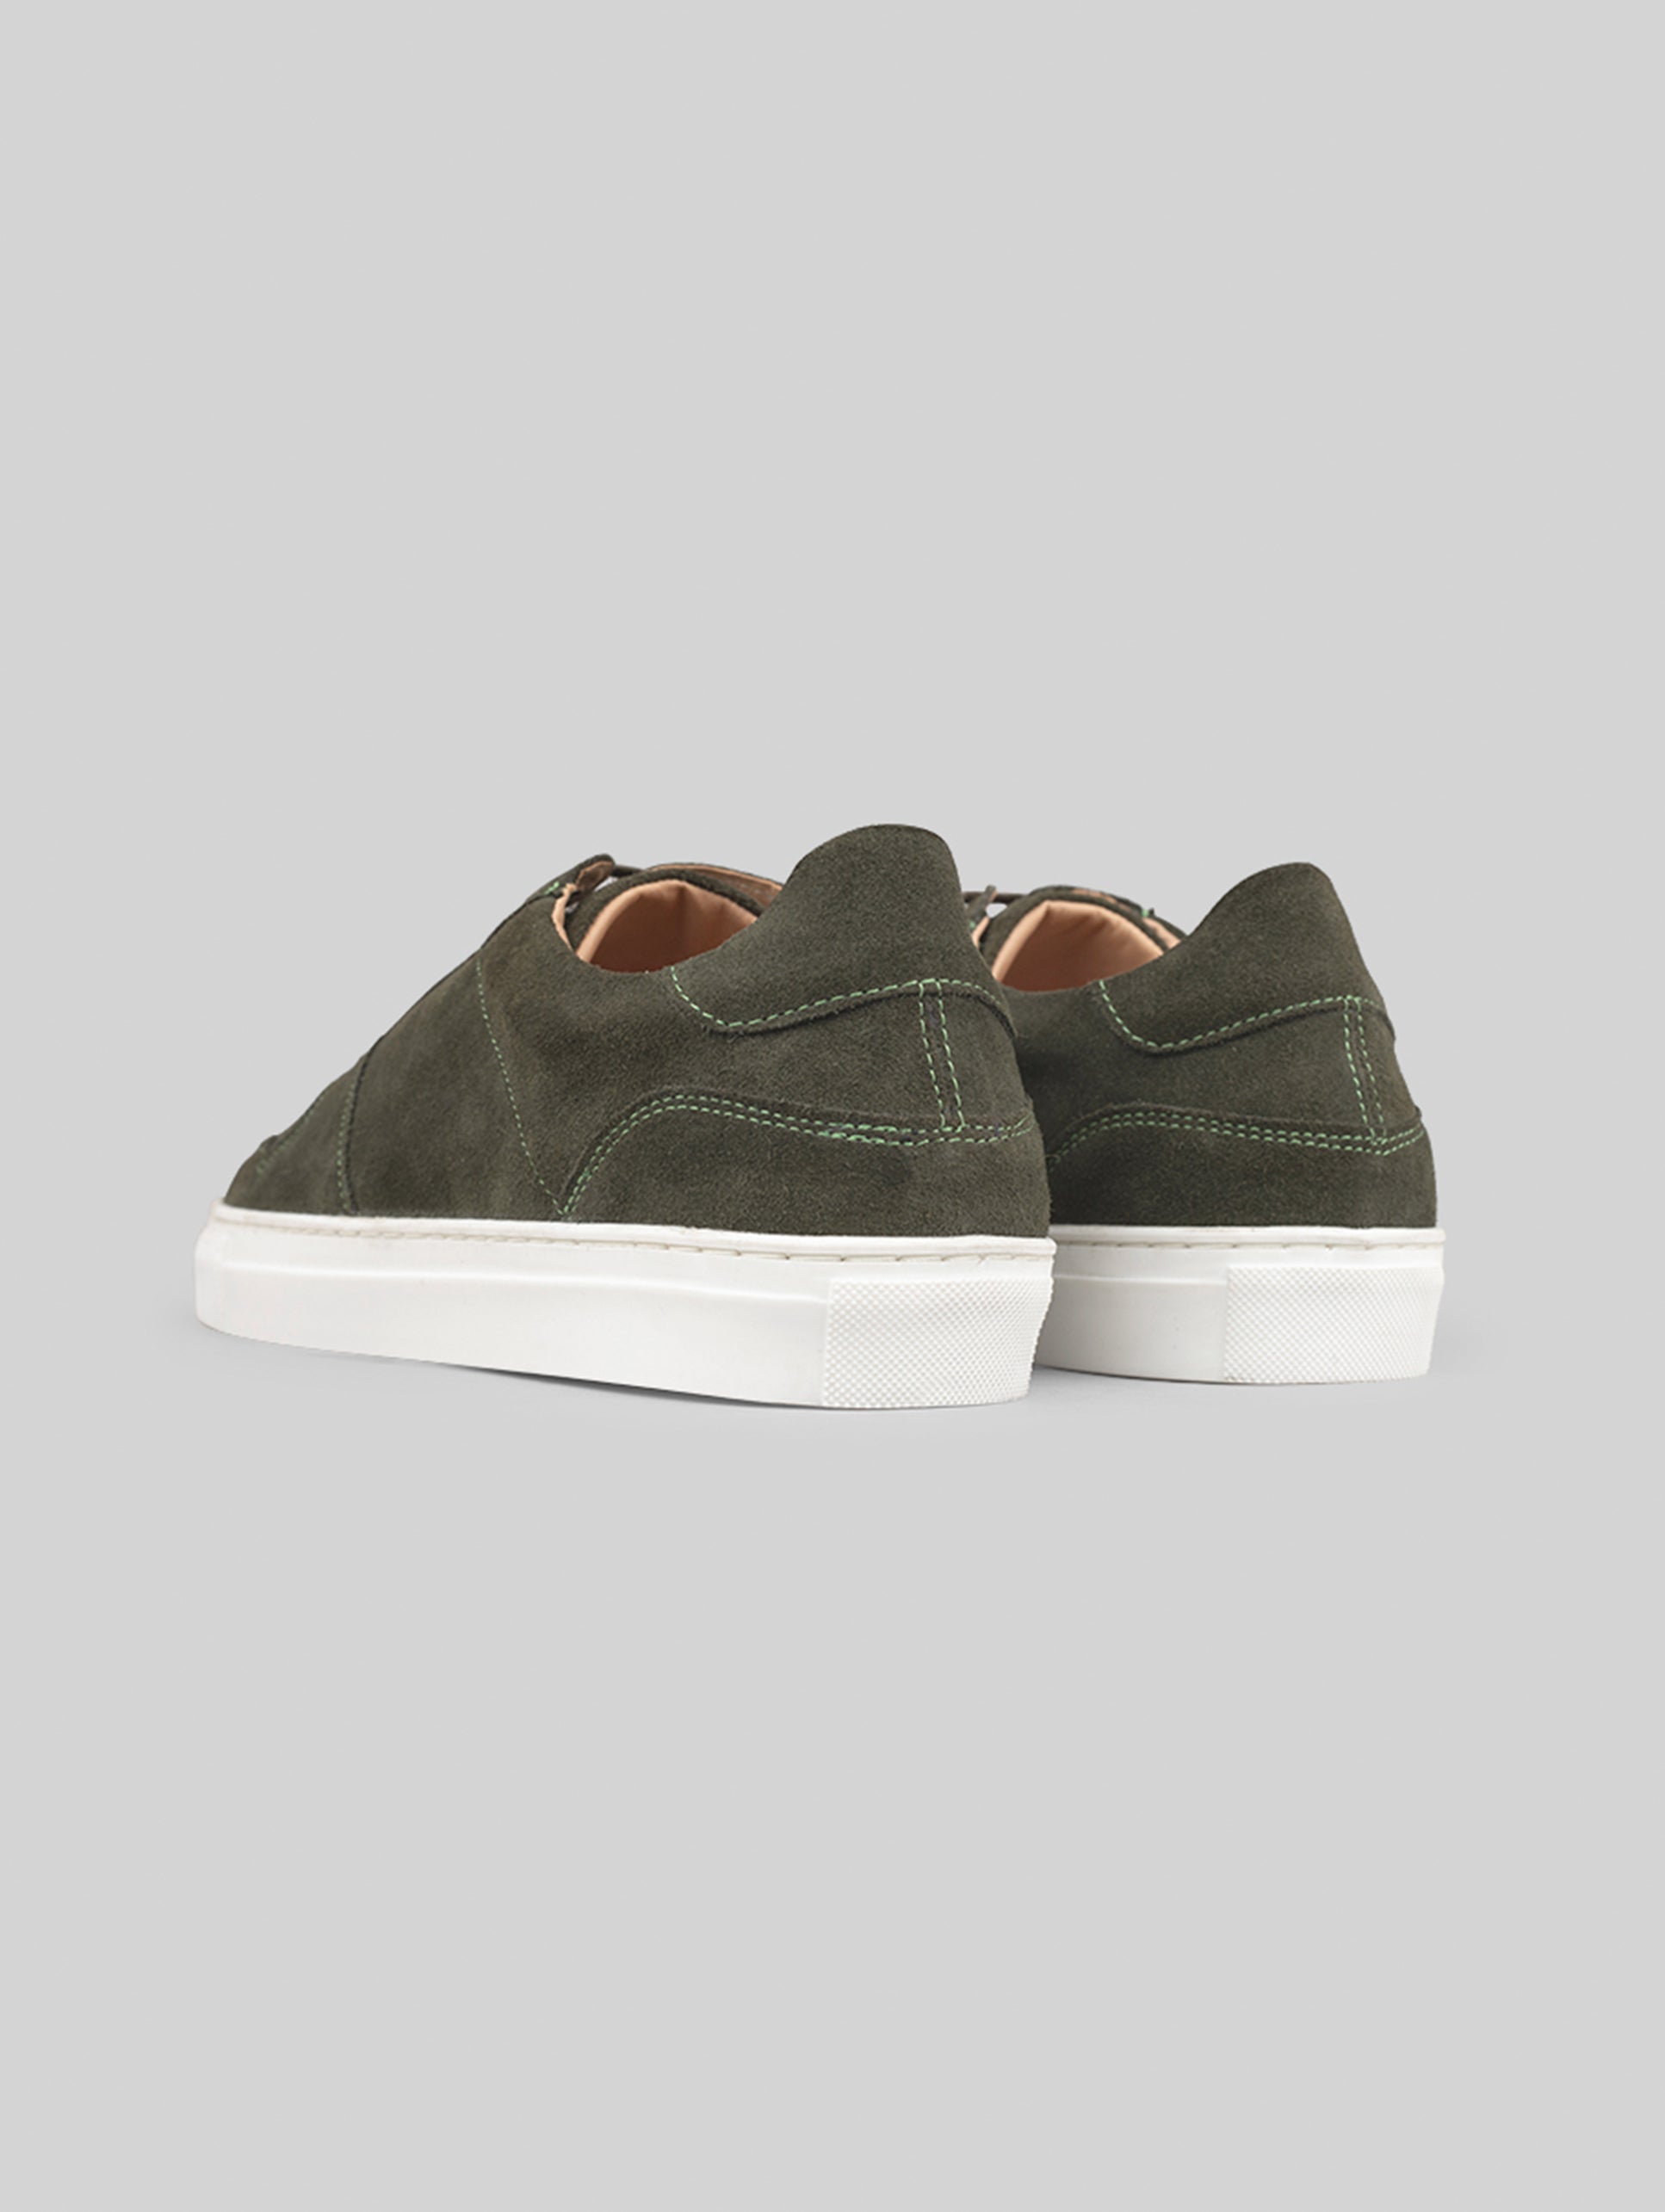 Louis Vuitton Men's Ollie Richelieu Sneakers Fabric and Suede - ShopStyle